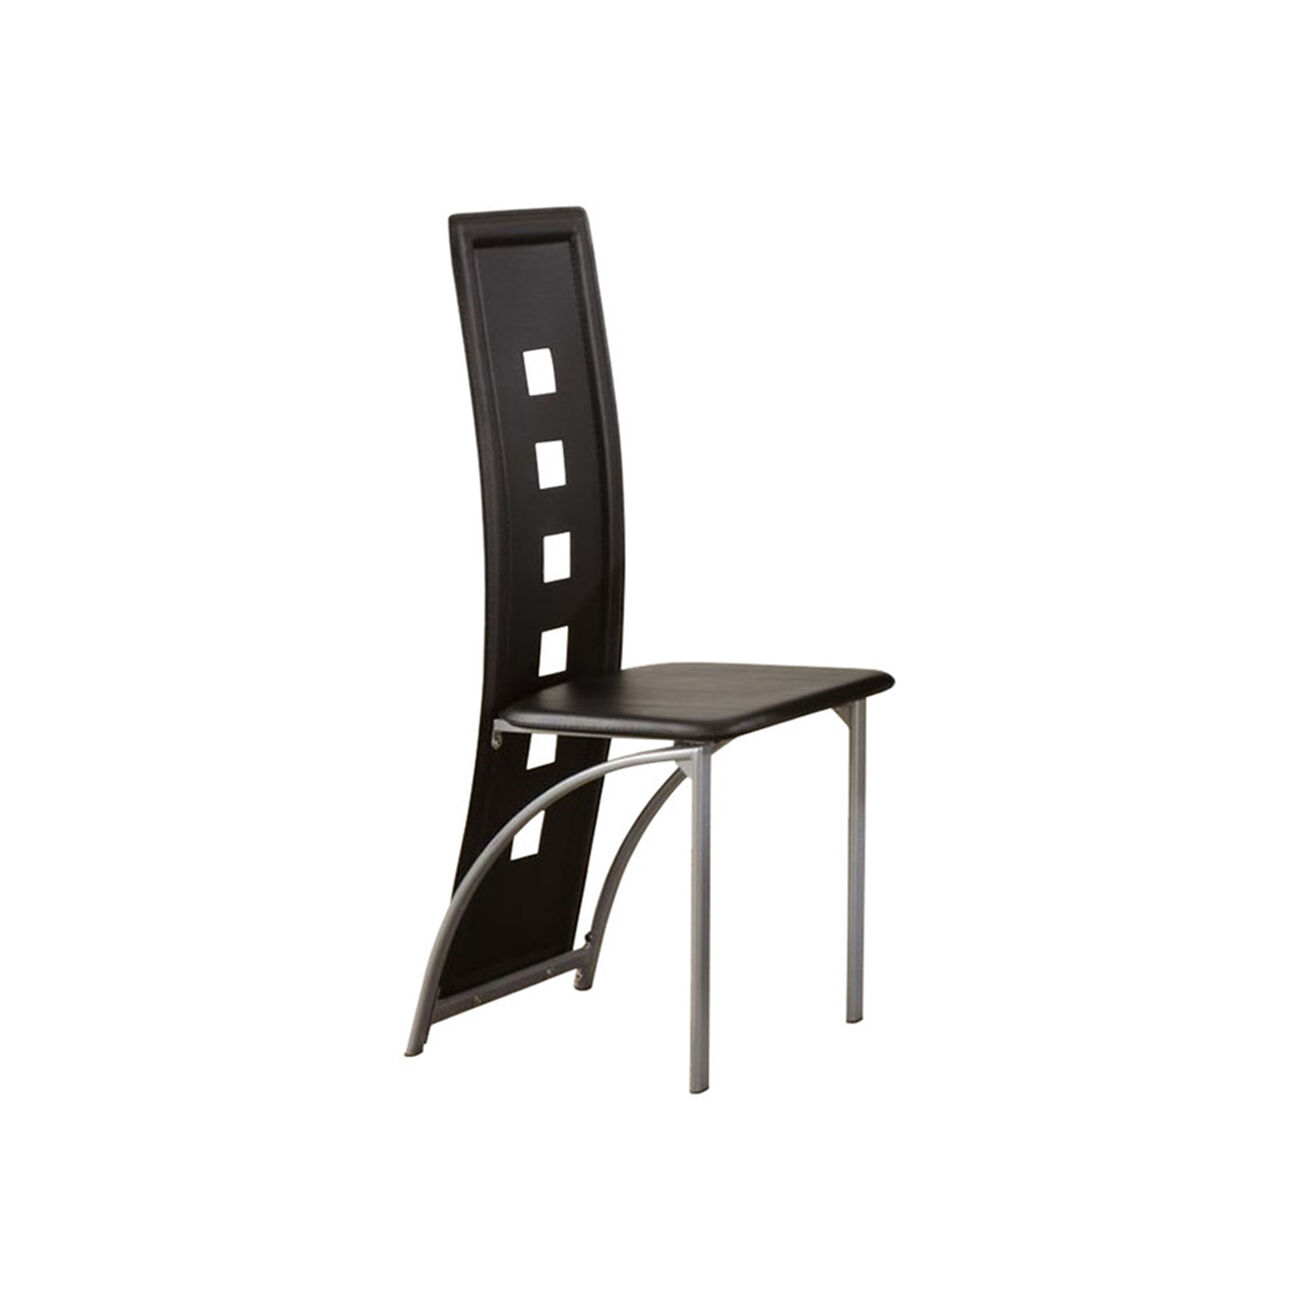 Contemporary Metal DINING CHAIR with cutout Back Set of 4 BLACK and CHROME